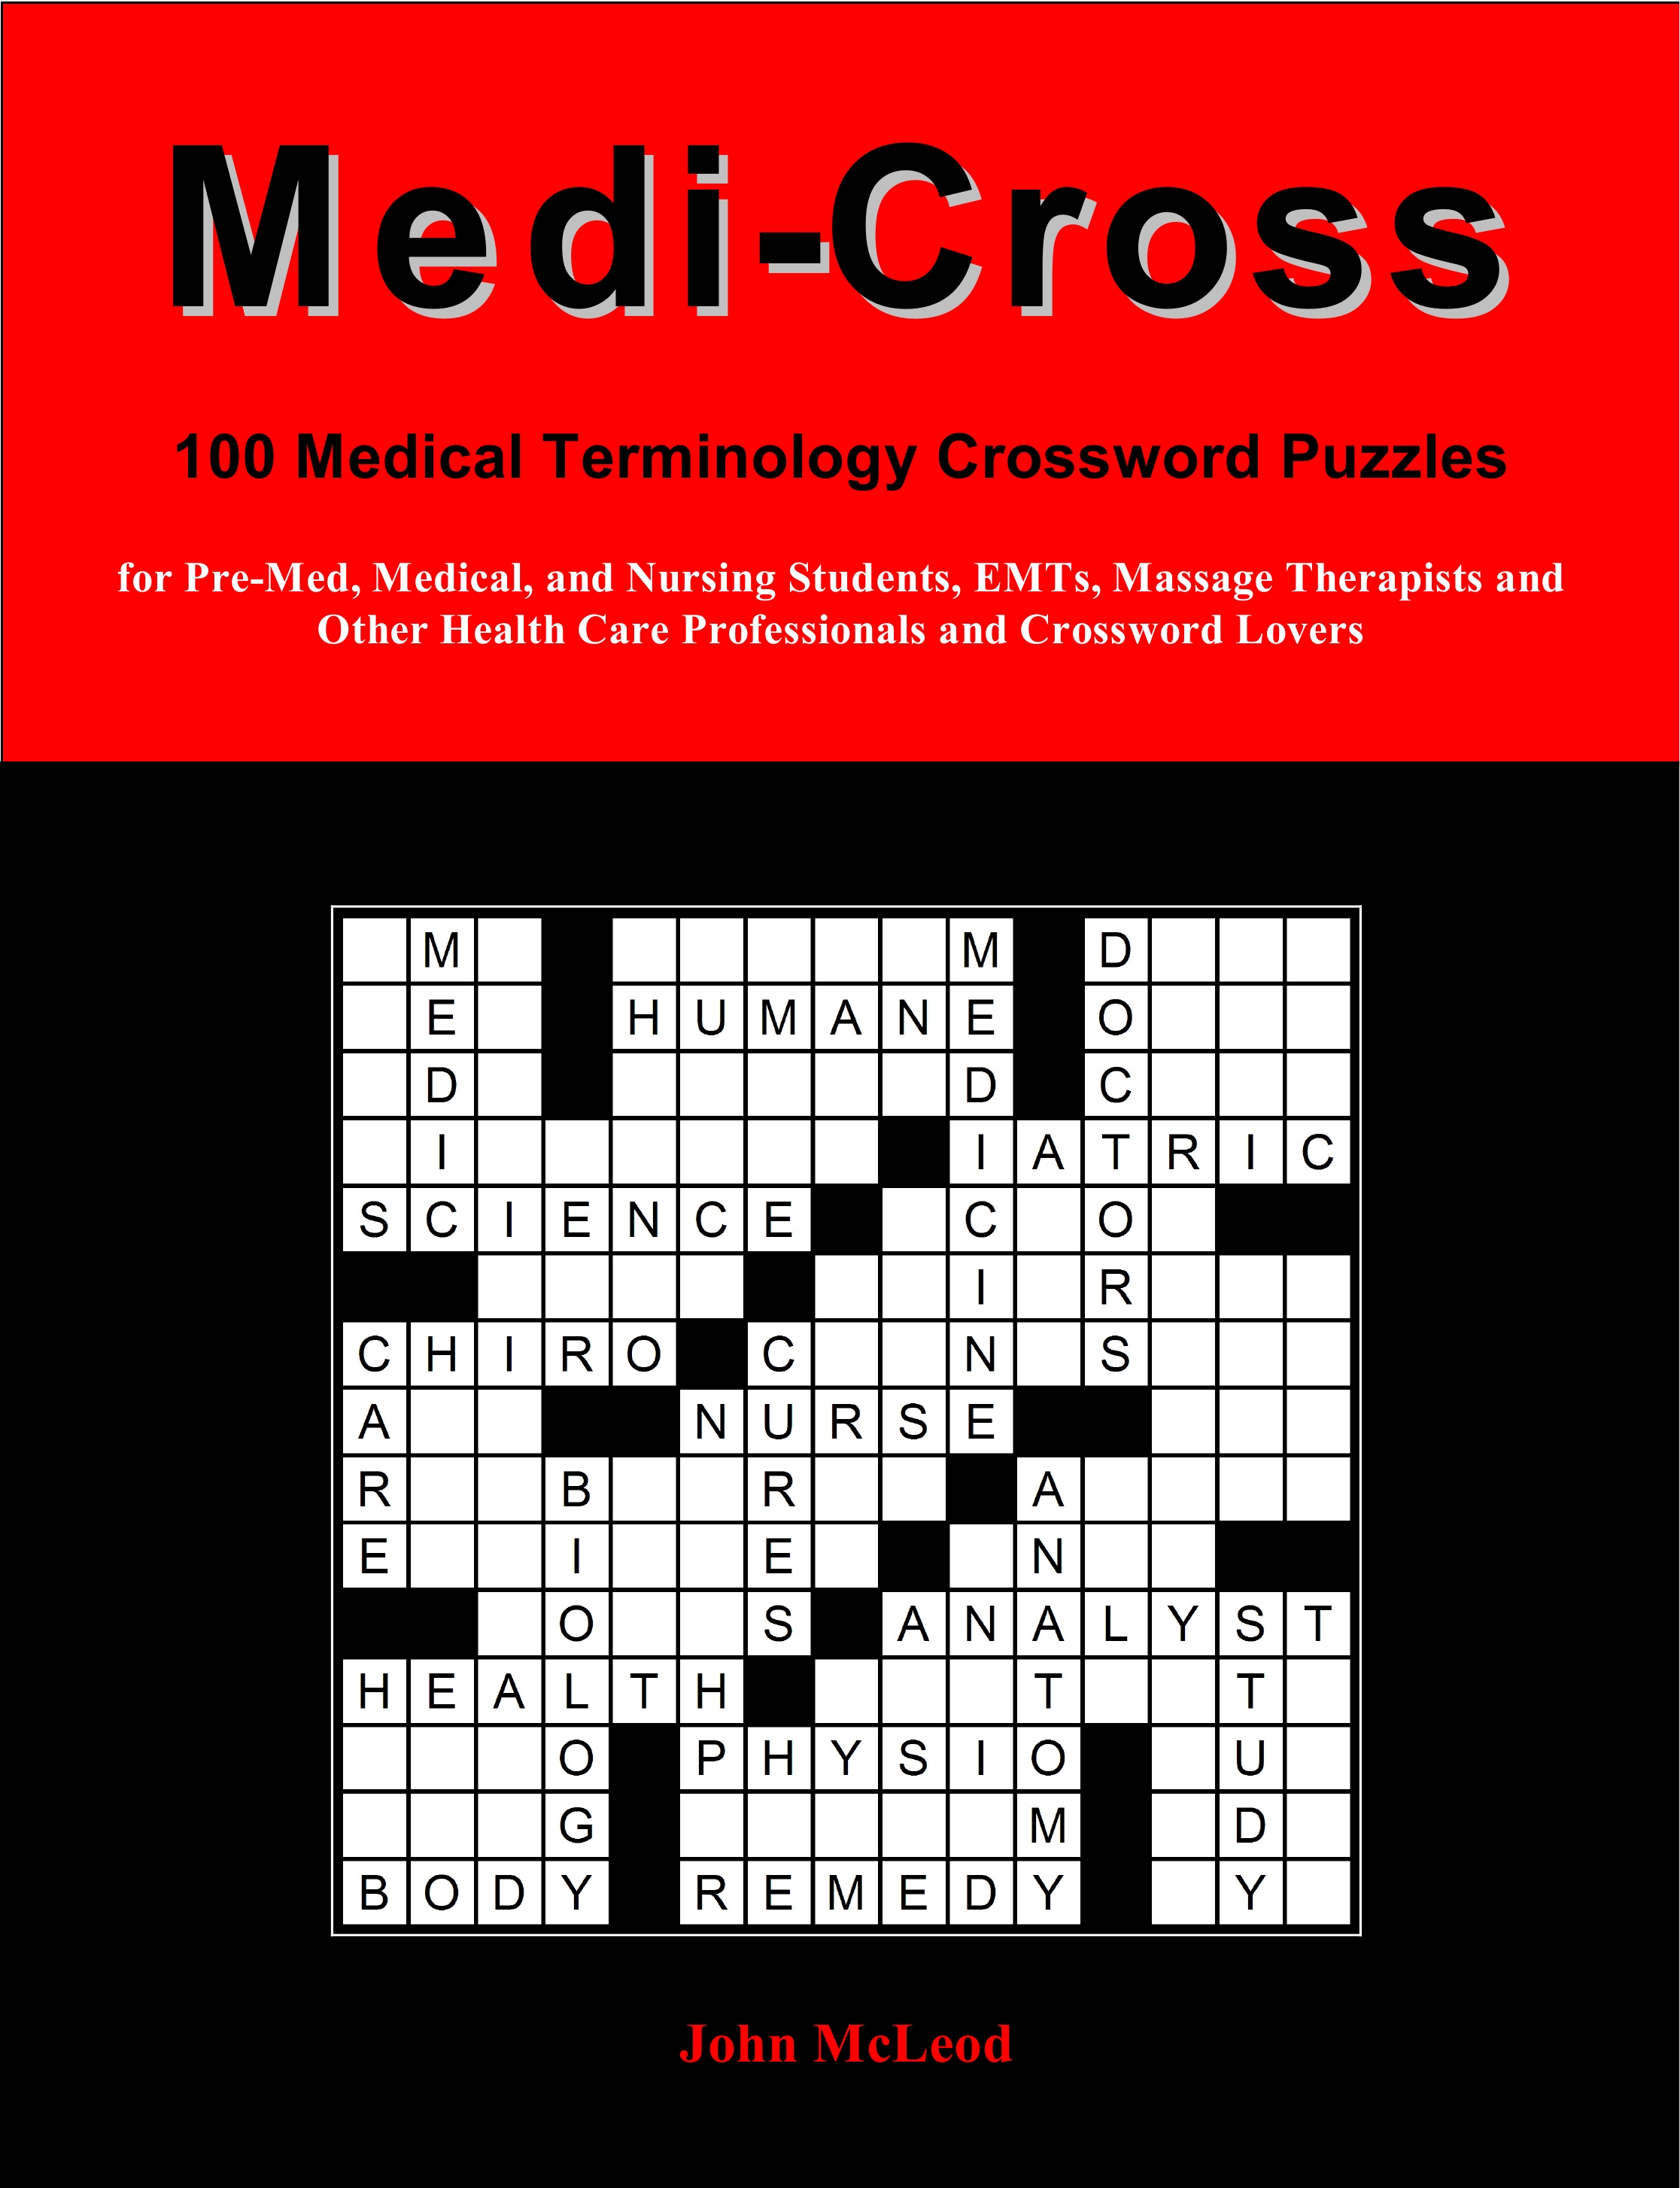 Medi-Cross: 100 Medical Terminology Crossword Puzzles for Pre-Med, Medical, and Nursing Students, EMTs, Massage Therapists and Other Health Care Professionals and Crossword Lovers (Volume 1)